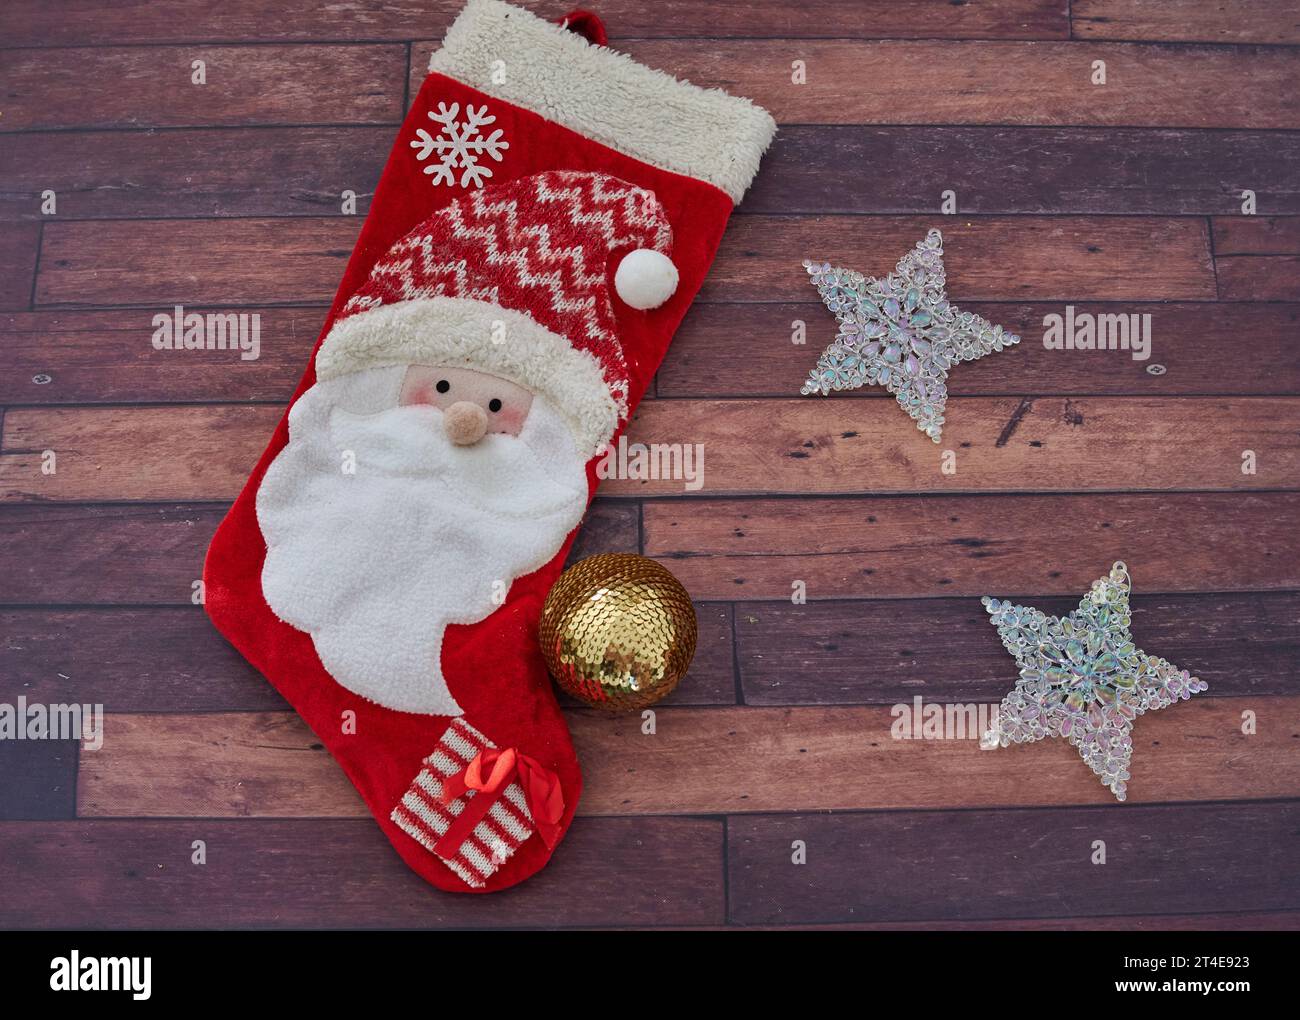 Christmas decoration. Santa red stocking with shining stars and a golden ball. Wooden background. horizontal Stock Photo